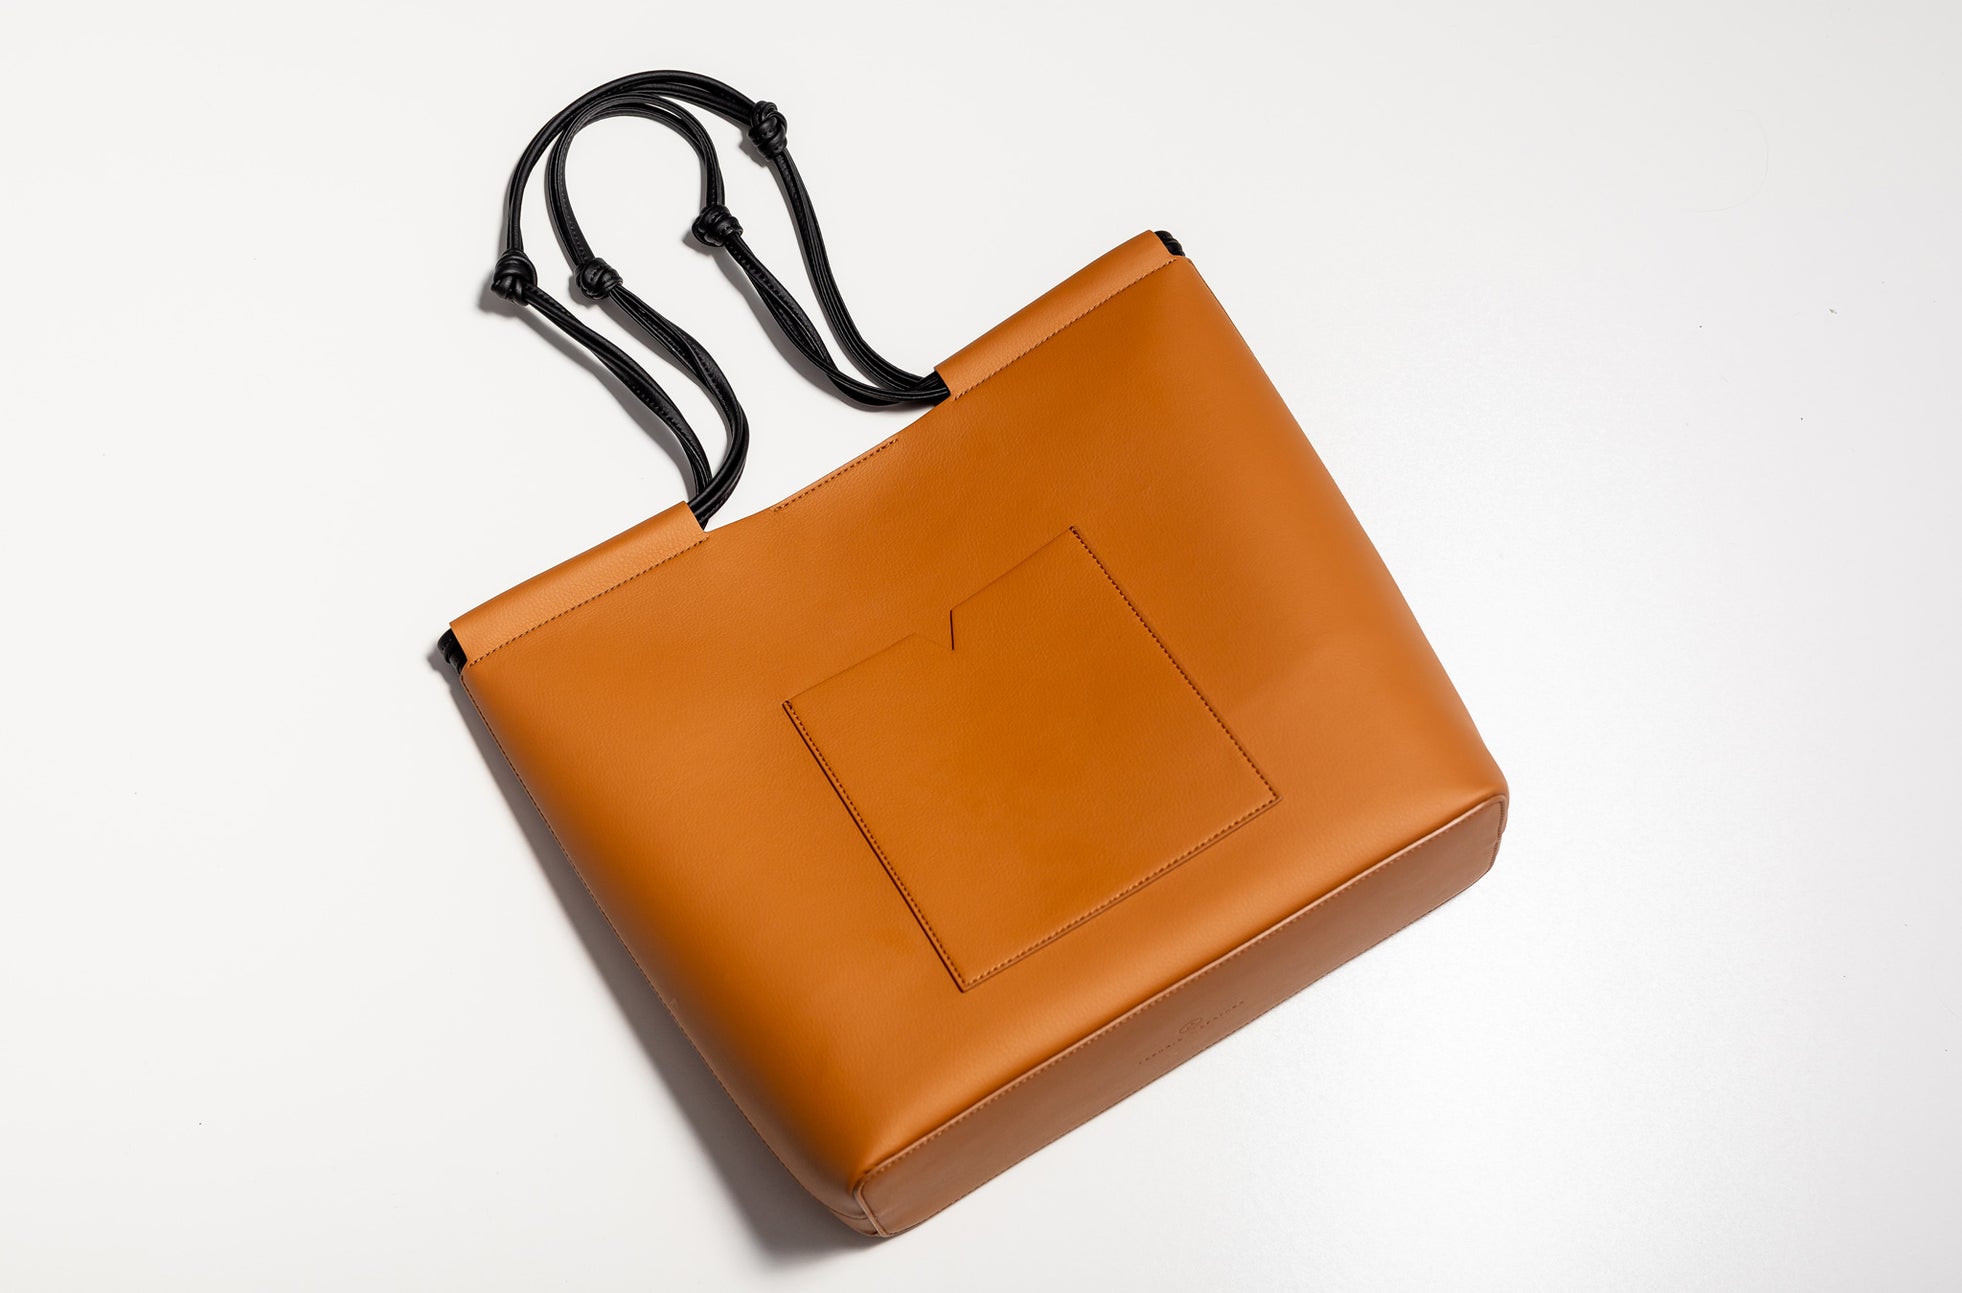 The Market Tote in Technik-Leather in Caramel and Black image 12